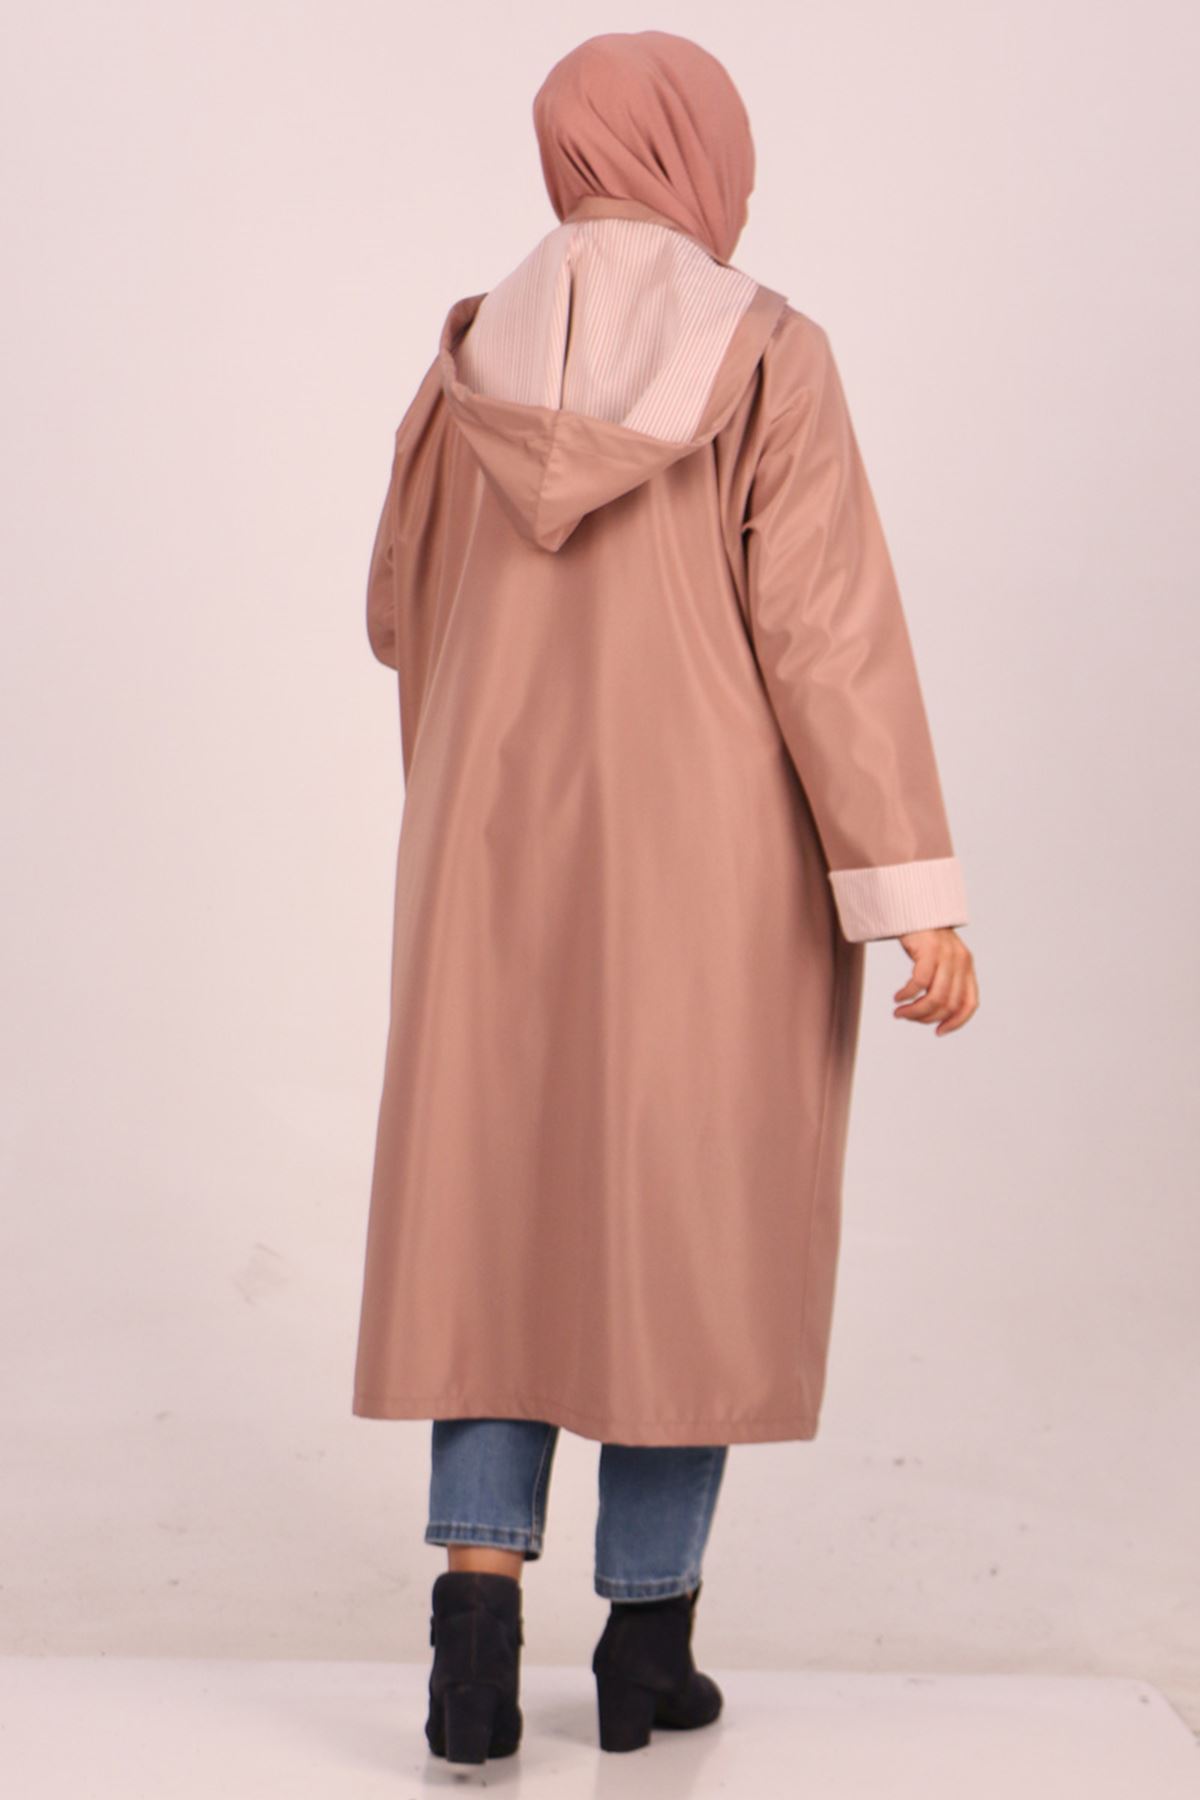 hijab interview outfit